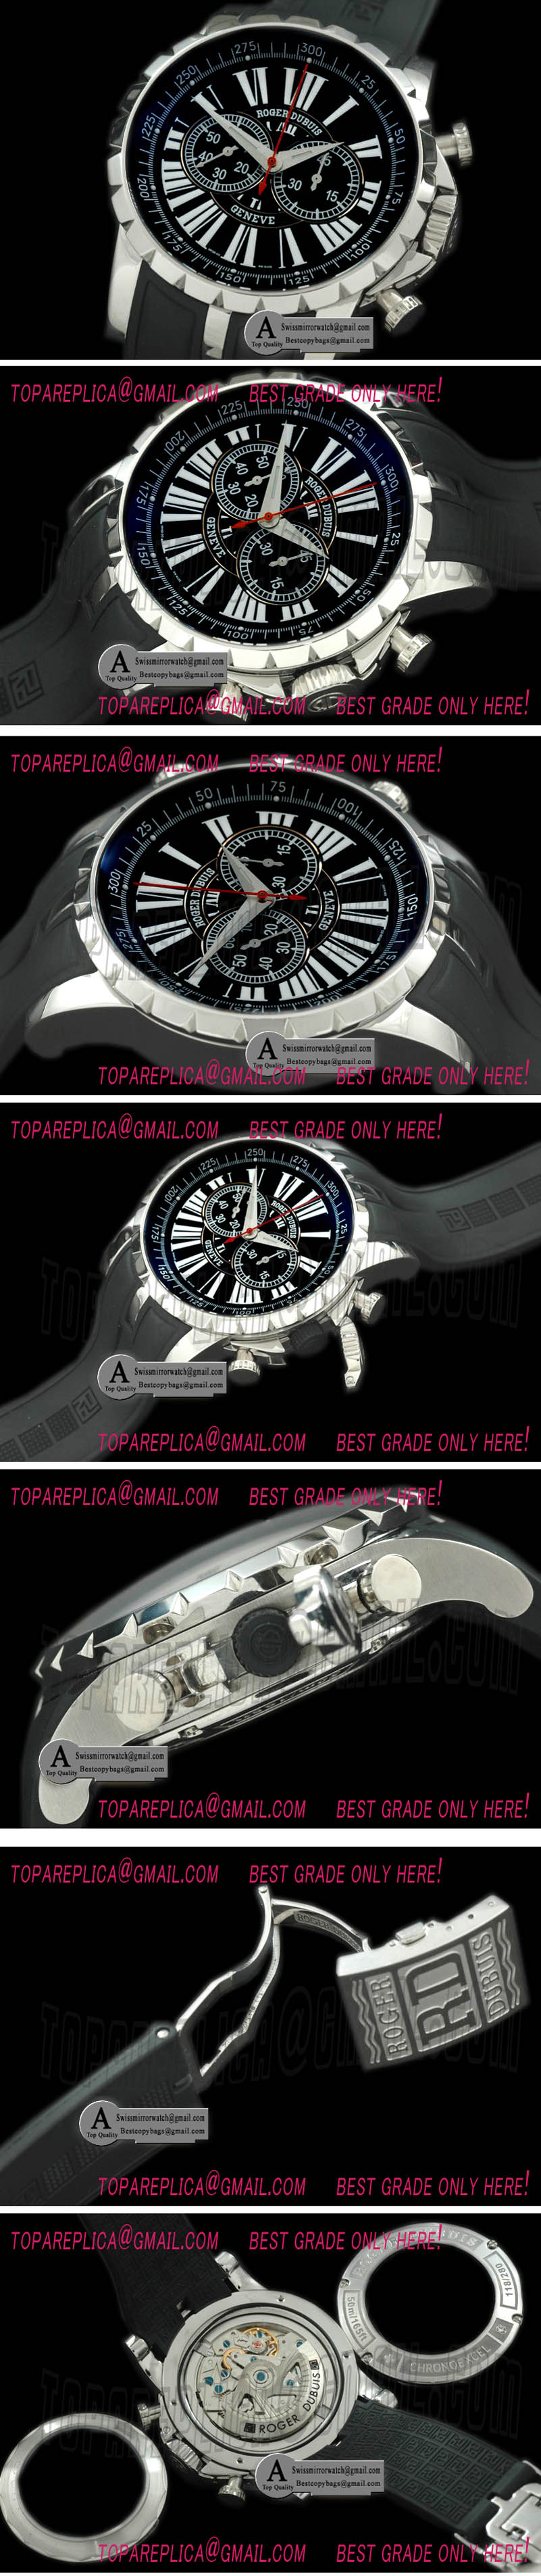 Roger Dubuis Chronoexcel 1 : 1 COMING SOON!!!!